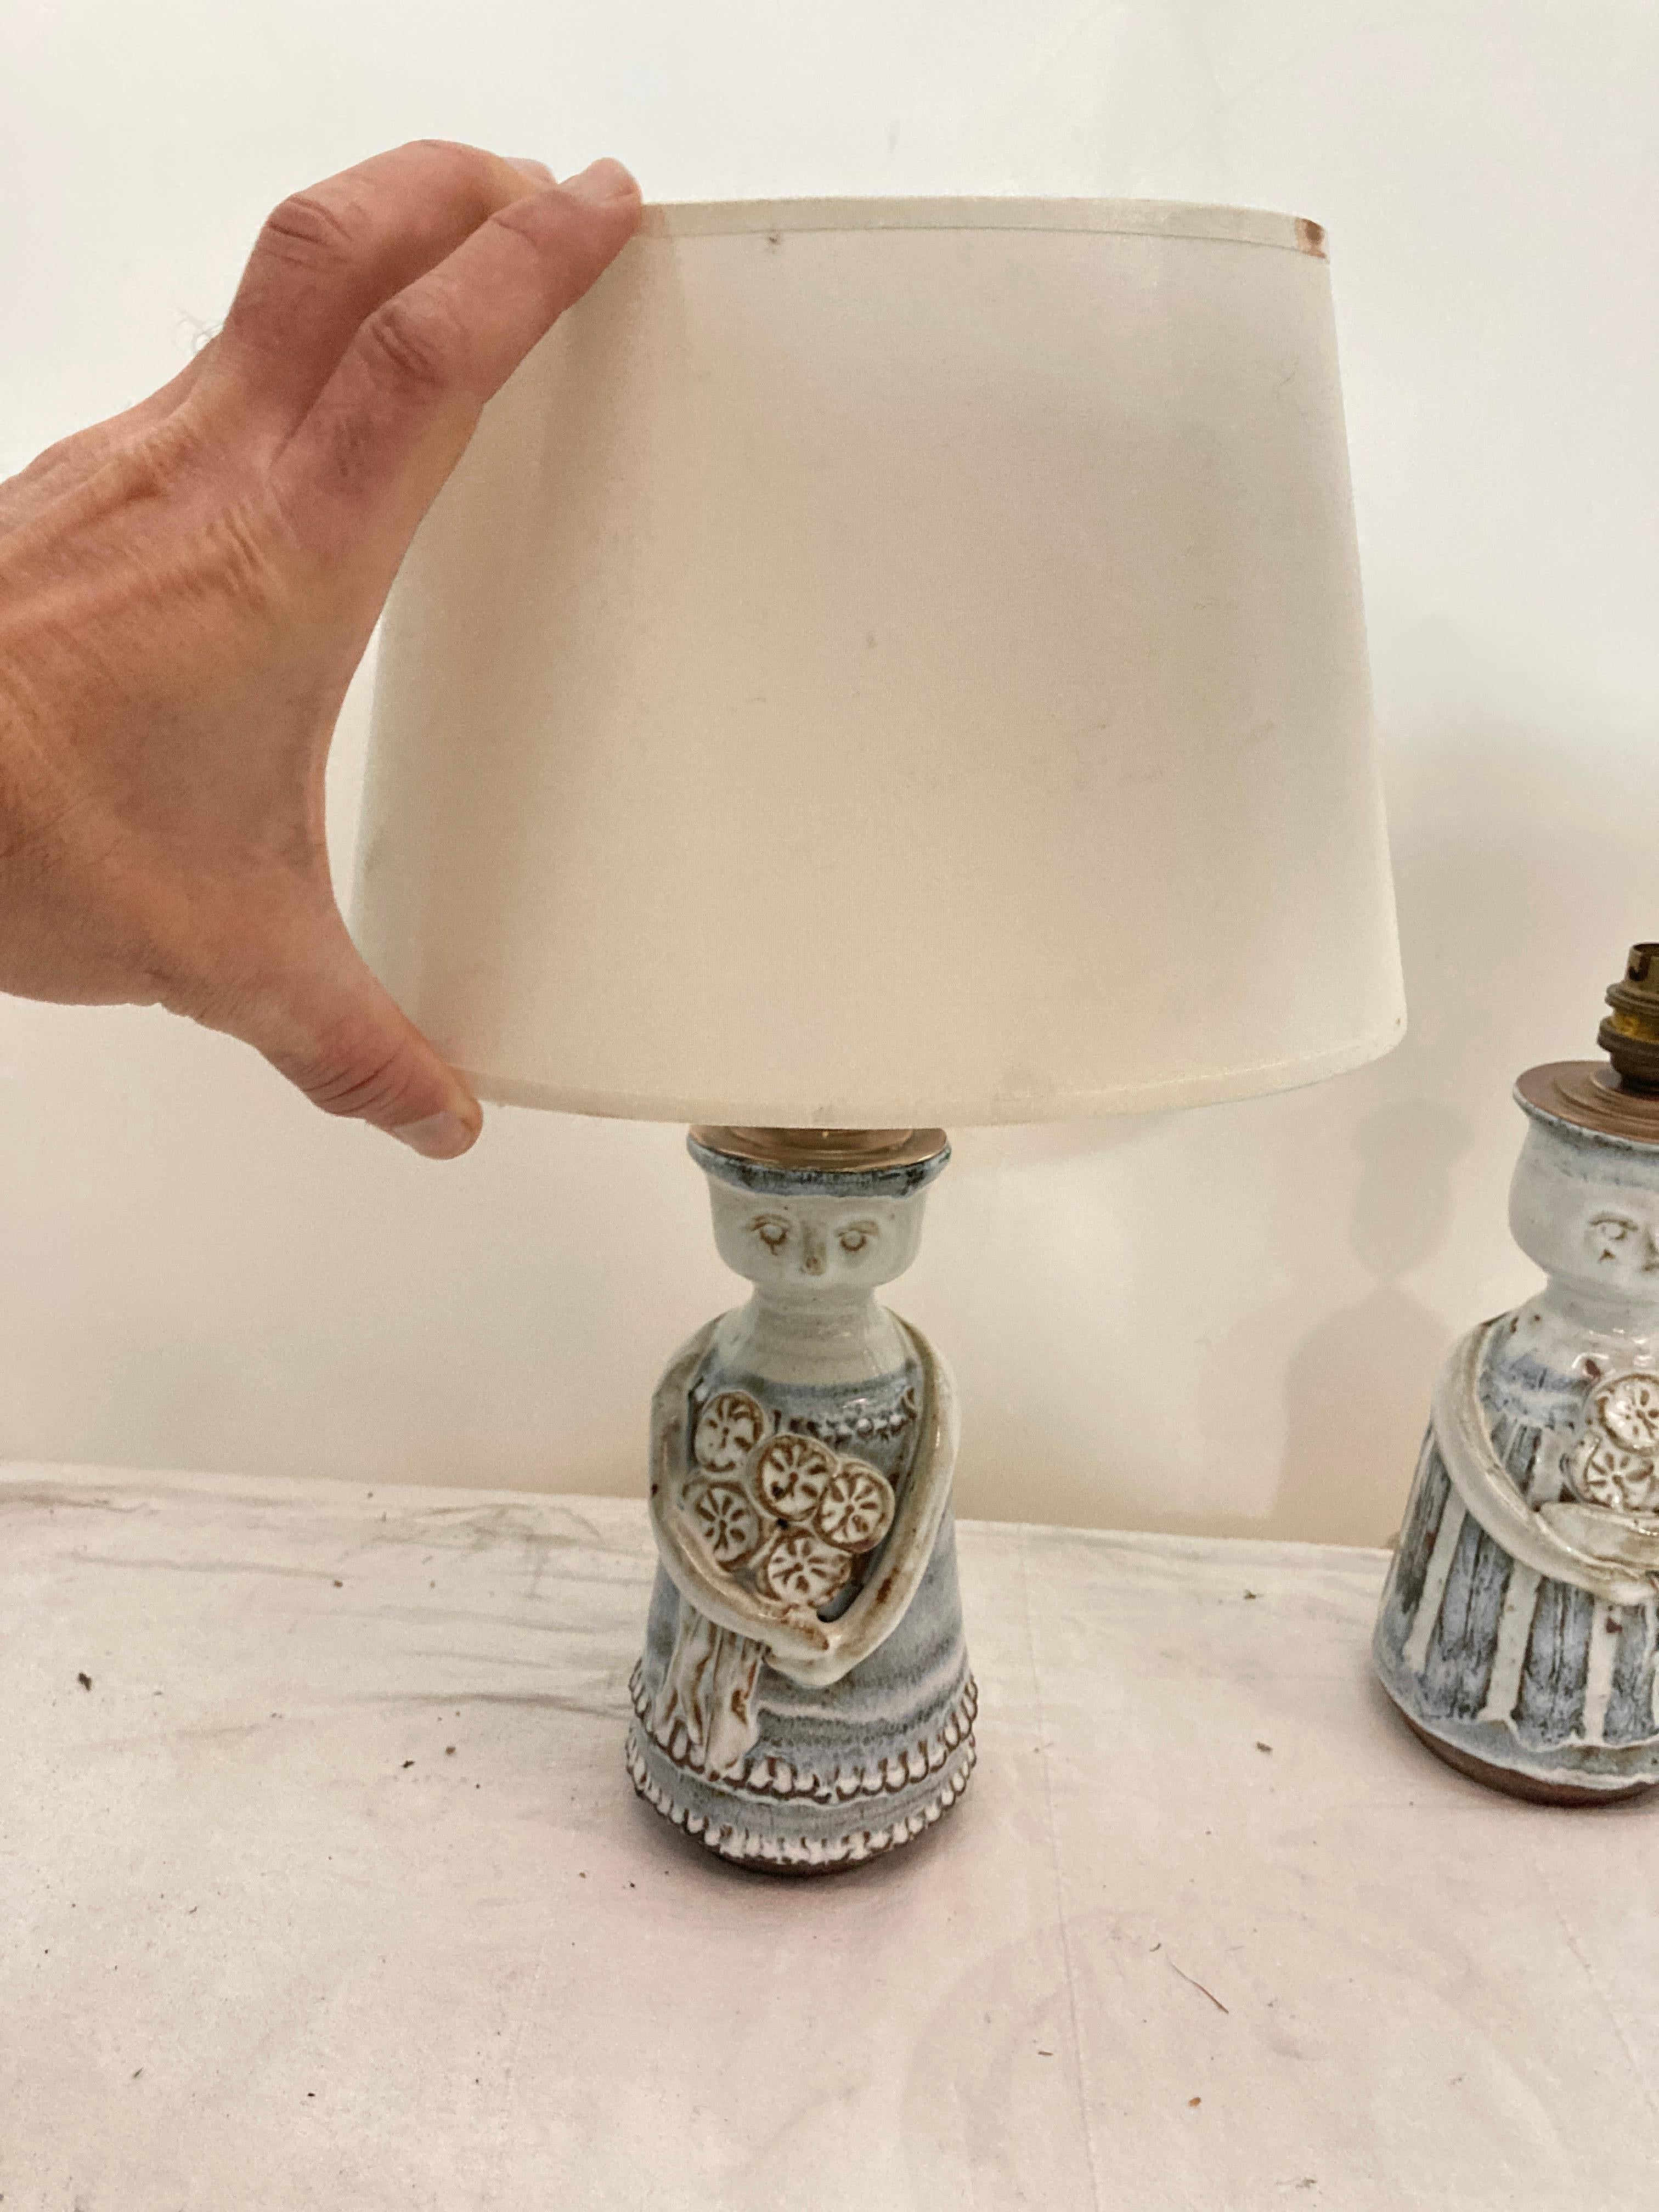 Very nice pair of studio pottery table lamps
1970's
Vallauris
France
Re-wired